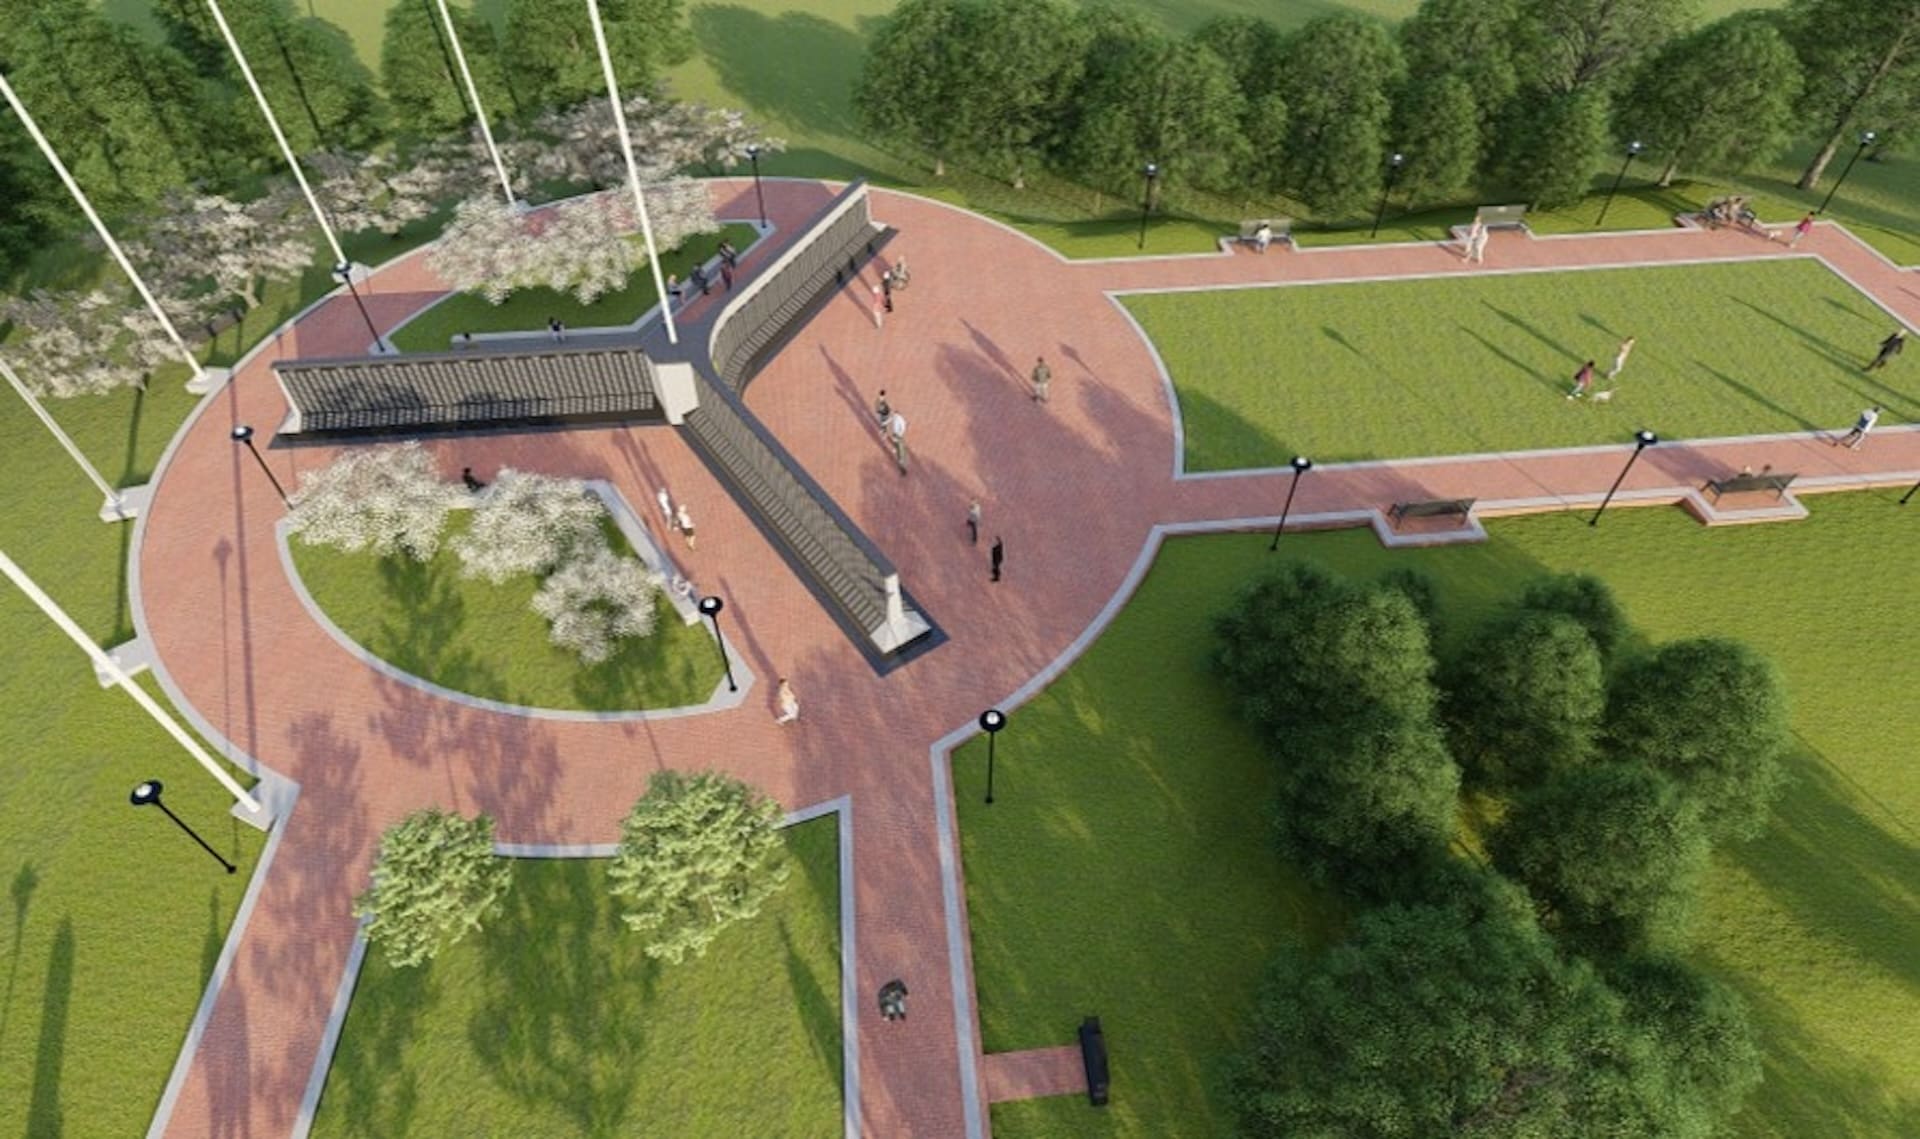 Featured image for “War memorial near bridge to be renovated, expanded”